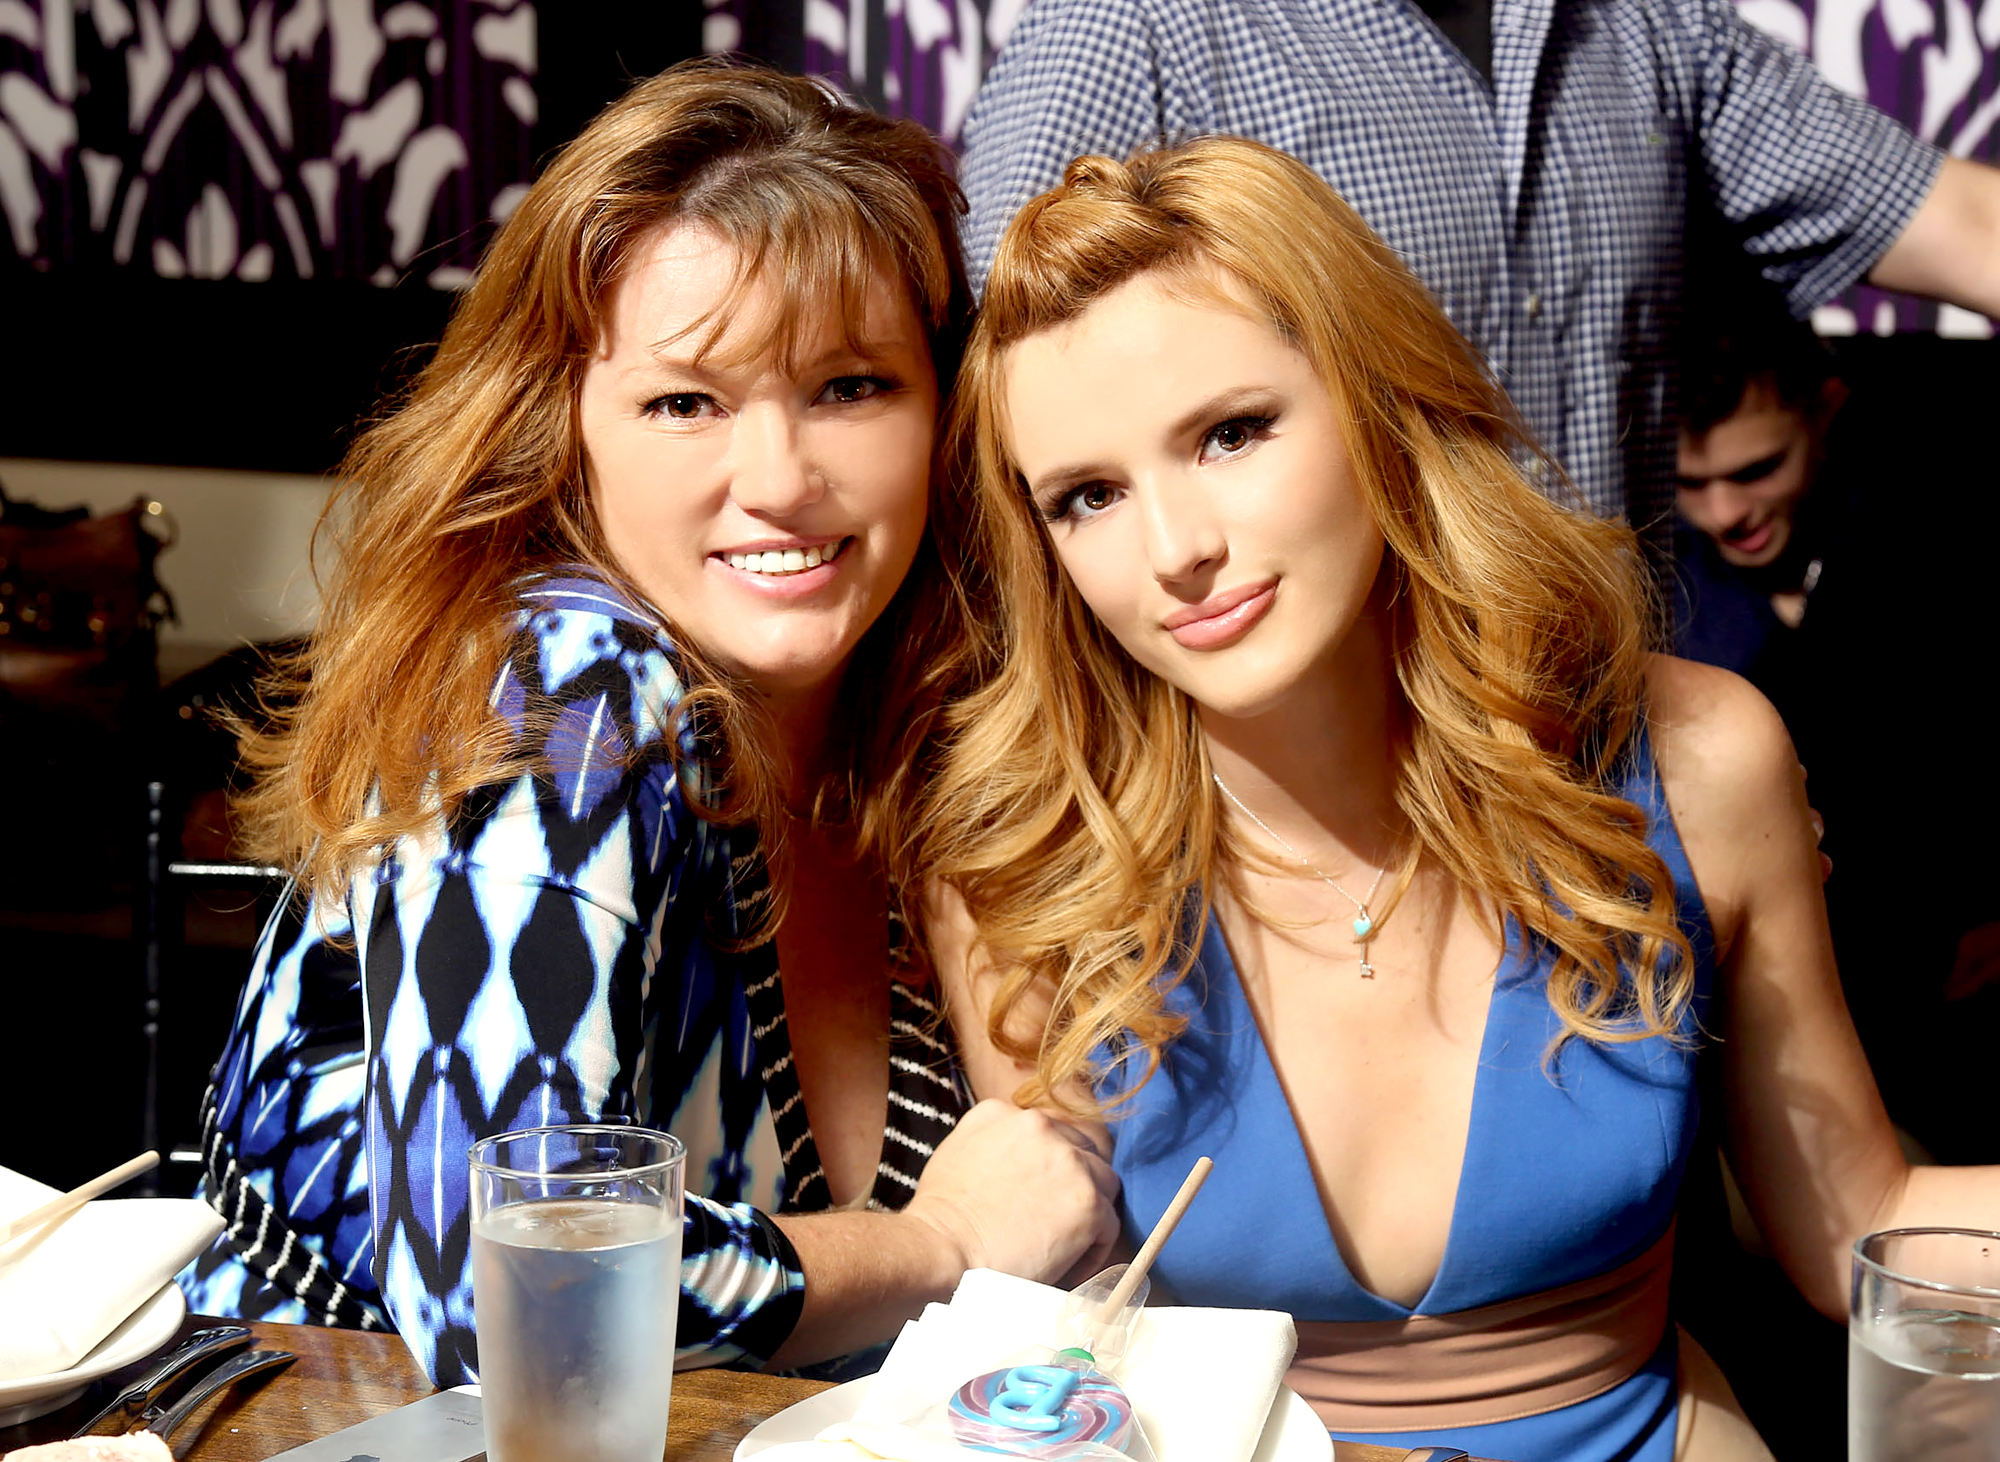 A thorne have sister bella does Bella Thorne's